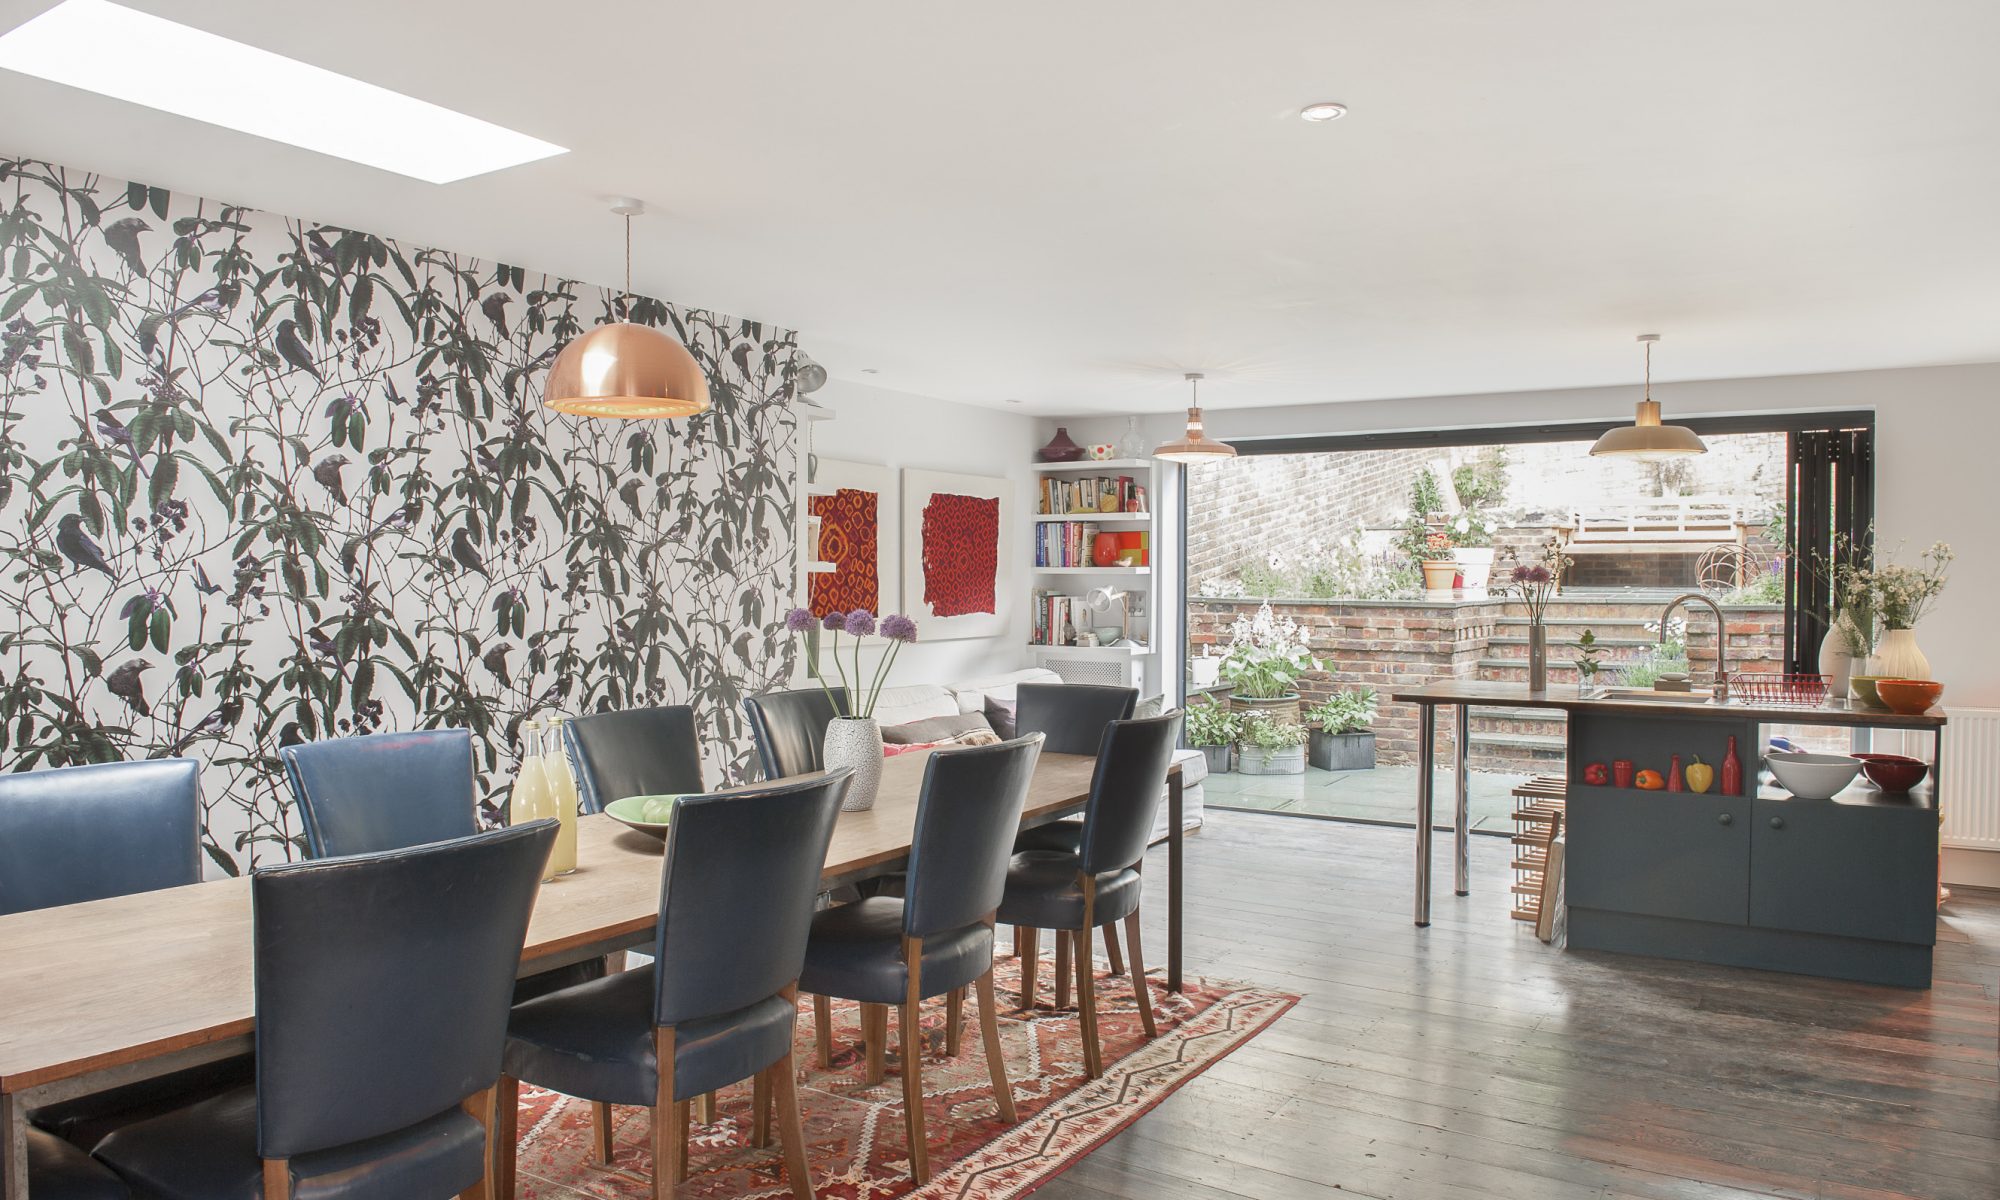 With inspiring views looking out to sea and glorious opened-up spaces within, Ginny and MJ have made a commanding terrace house in Hastings as harmonious as the choirs they run